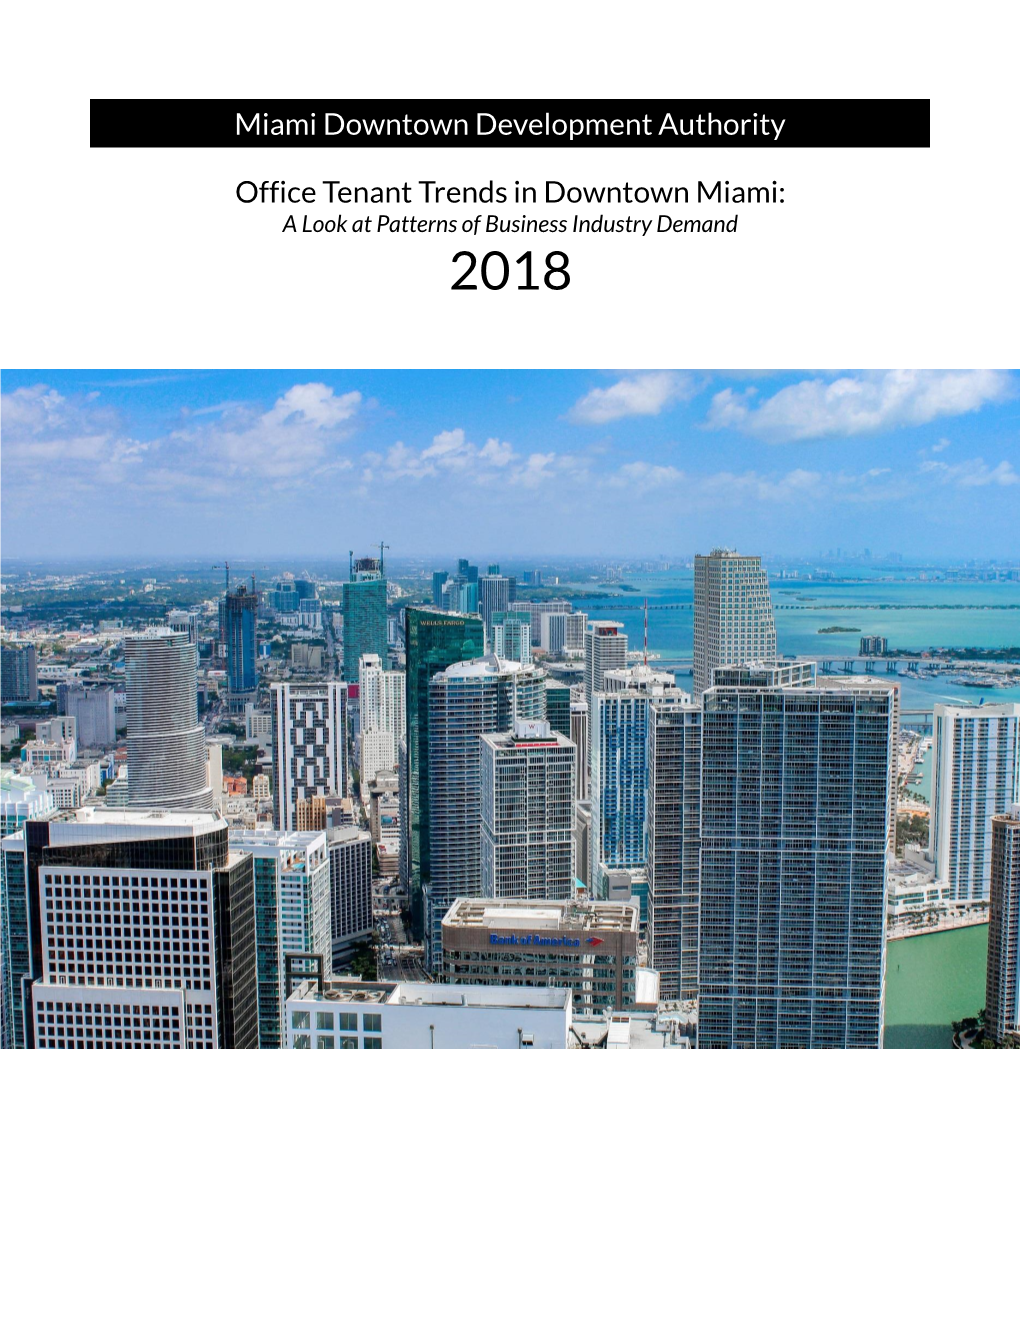 Office Tenant Trends in Downtown Miami